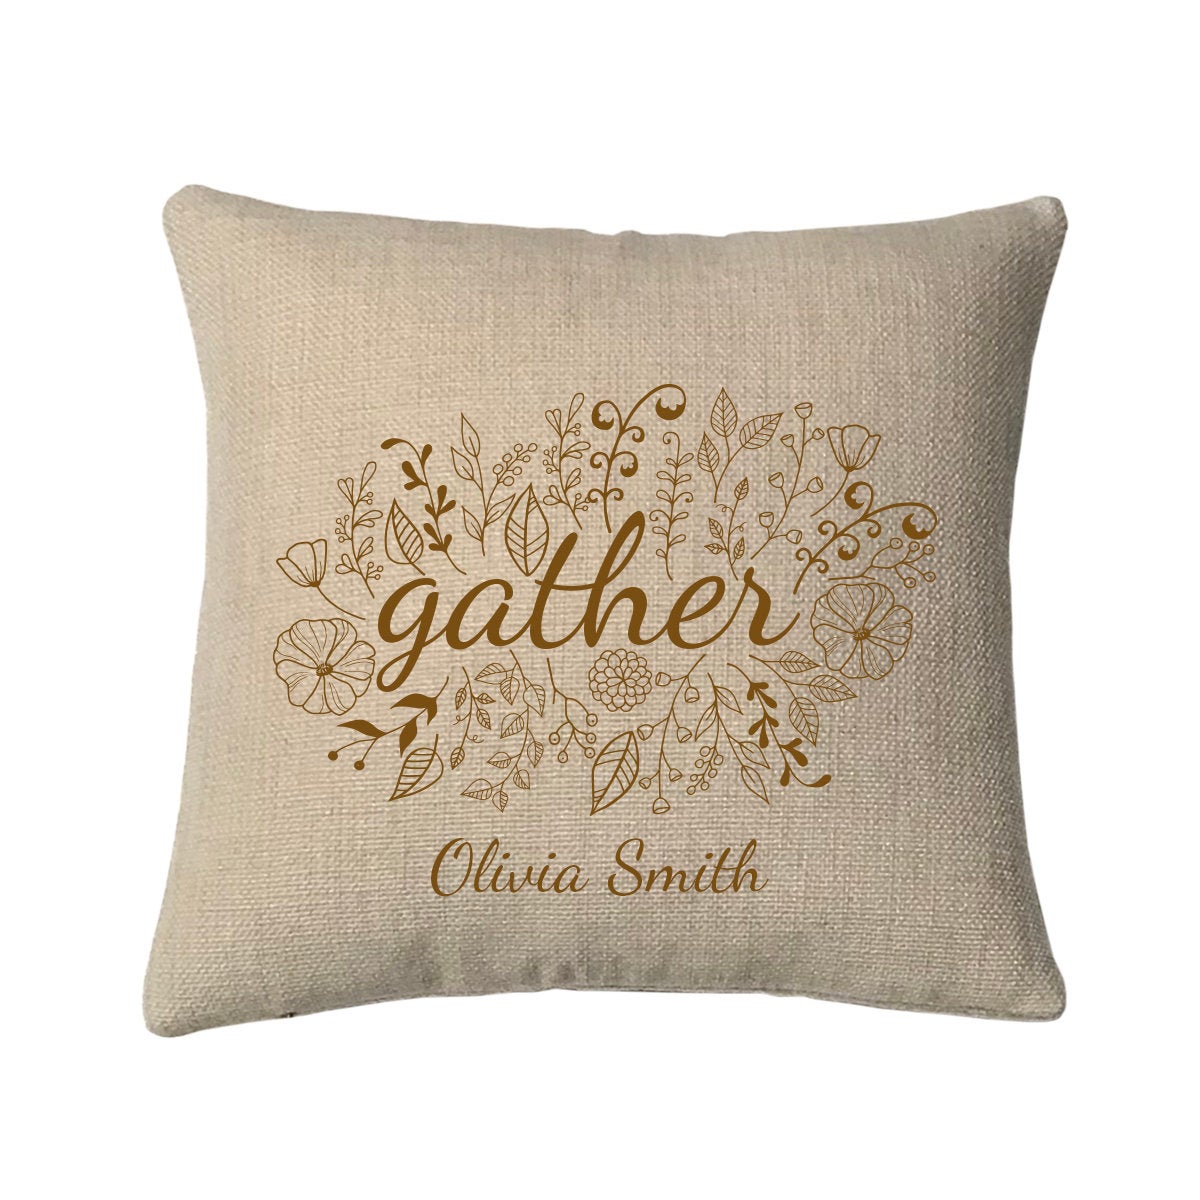 Personalized Gather Mini Throw Pillow Measures 9.5 Inches X 9.5 inches (Insert is included) Complete Very Small Throw Pillow